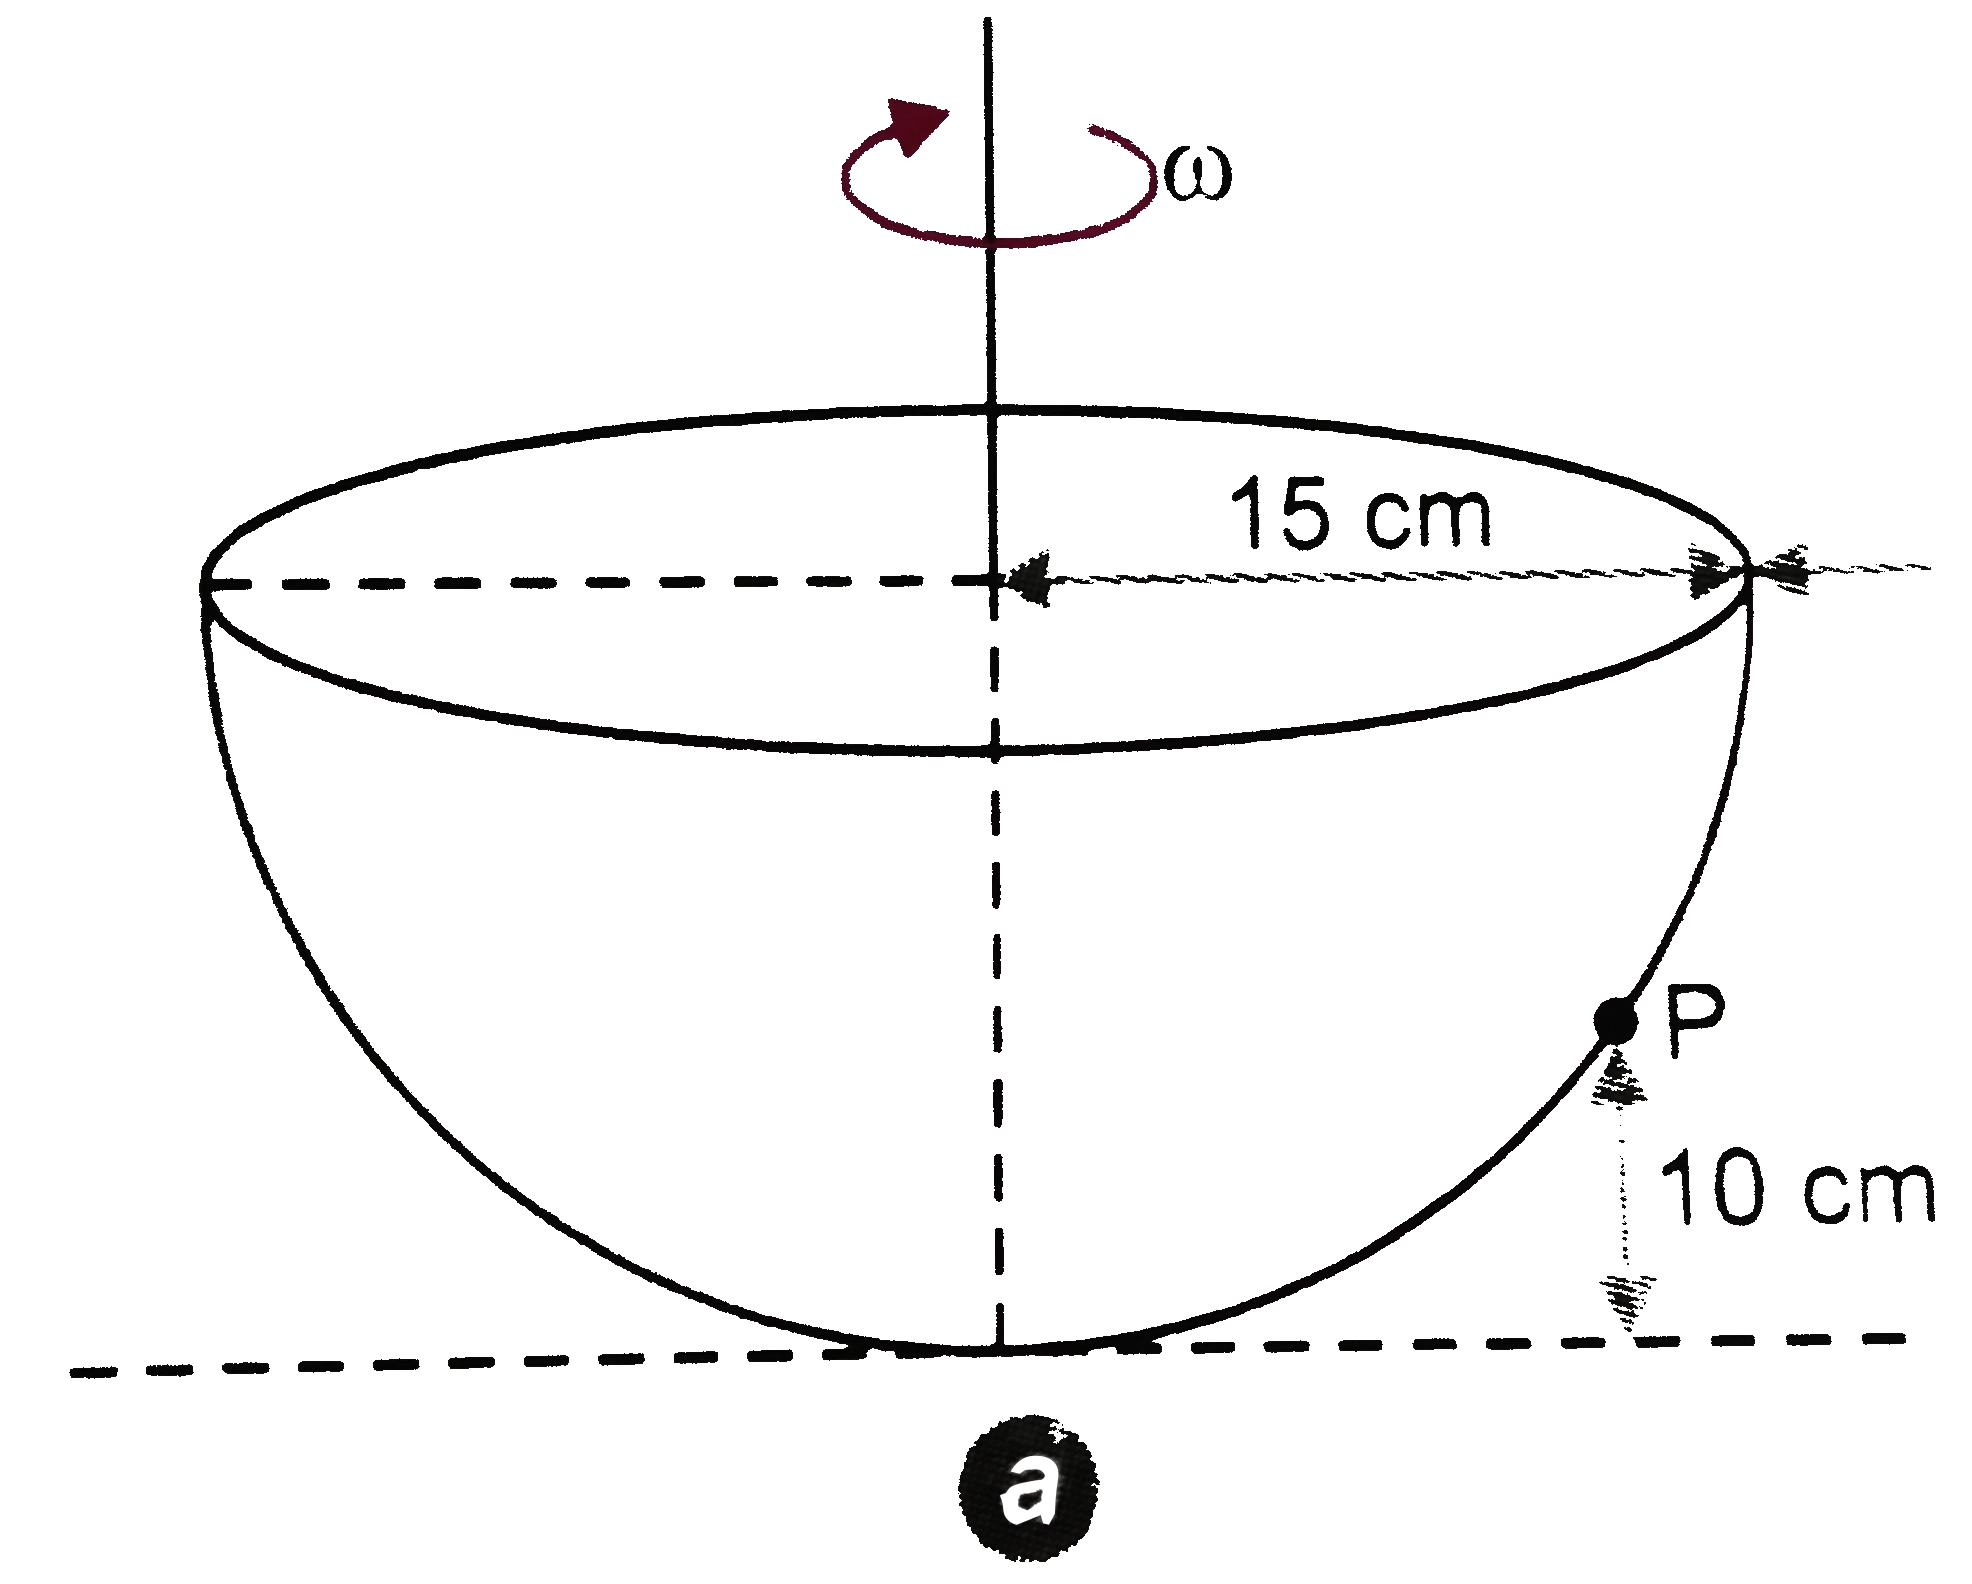 A smooth hemispherical bowl  30 cm diameter, rotates with a constant angular velocity   omega, about its vertical axis of symmetry Fig. 2 (APC) . 2 (a) . A particle at (P) of weighing  5 kg is observed to remain at rest relative  to the bowl at a height 10 cm above the base. Find the magnitude of the force exerted by the bowl on the particle and speed of rotation of the bowl.   .